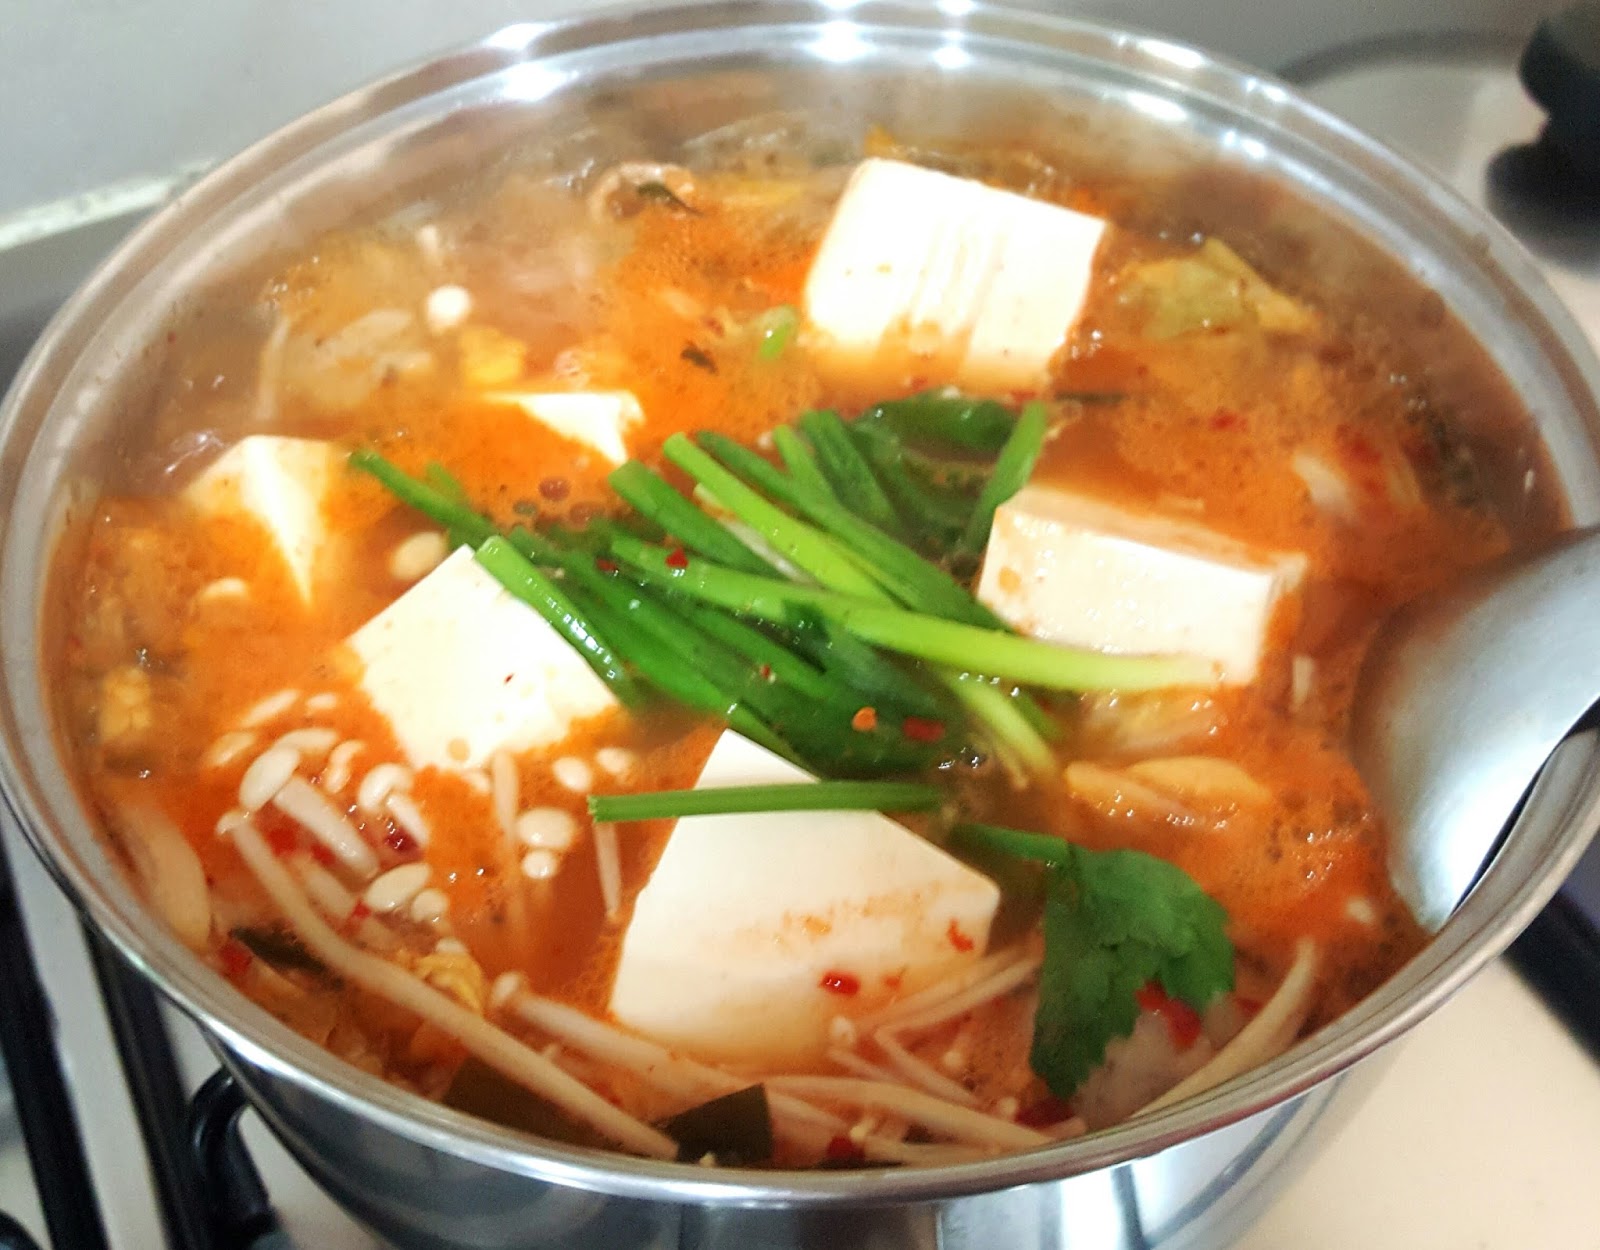 Catherine's Cooking @ cathteops: Kimchi Meat Soup